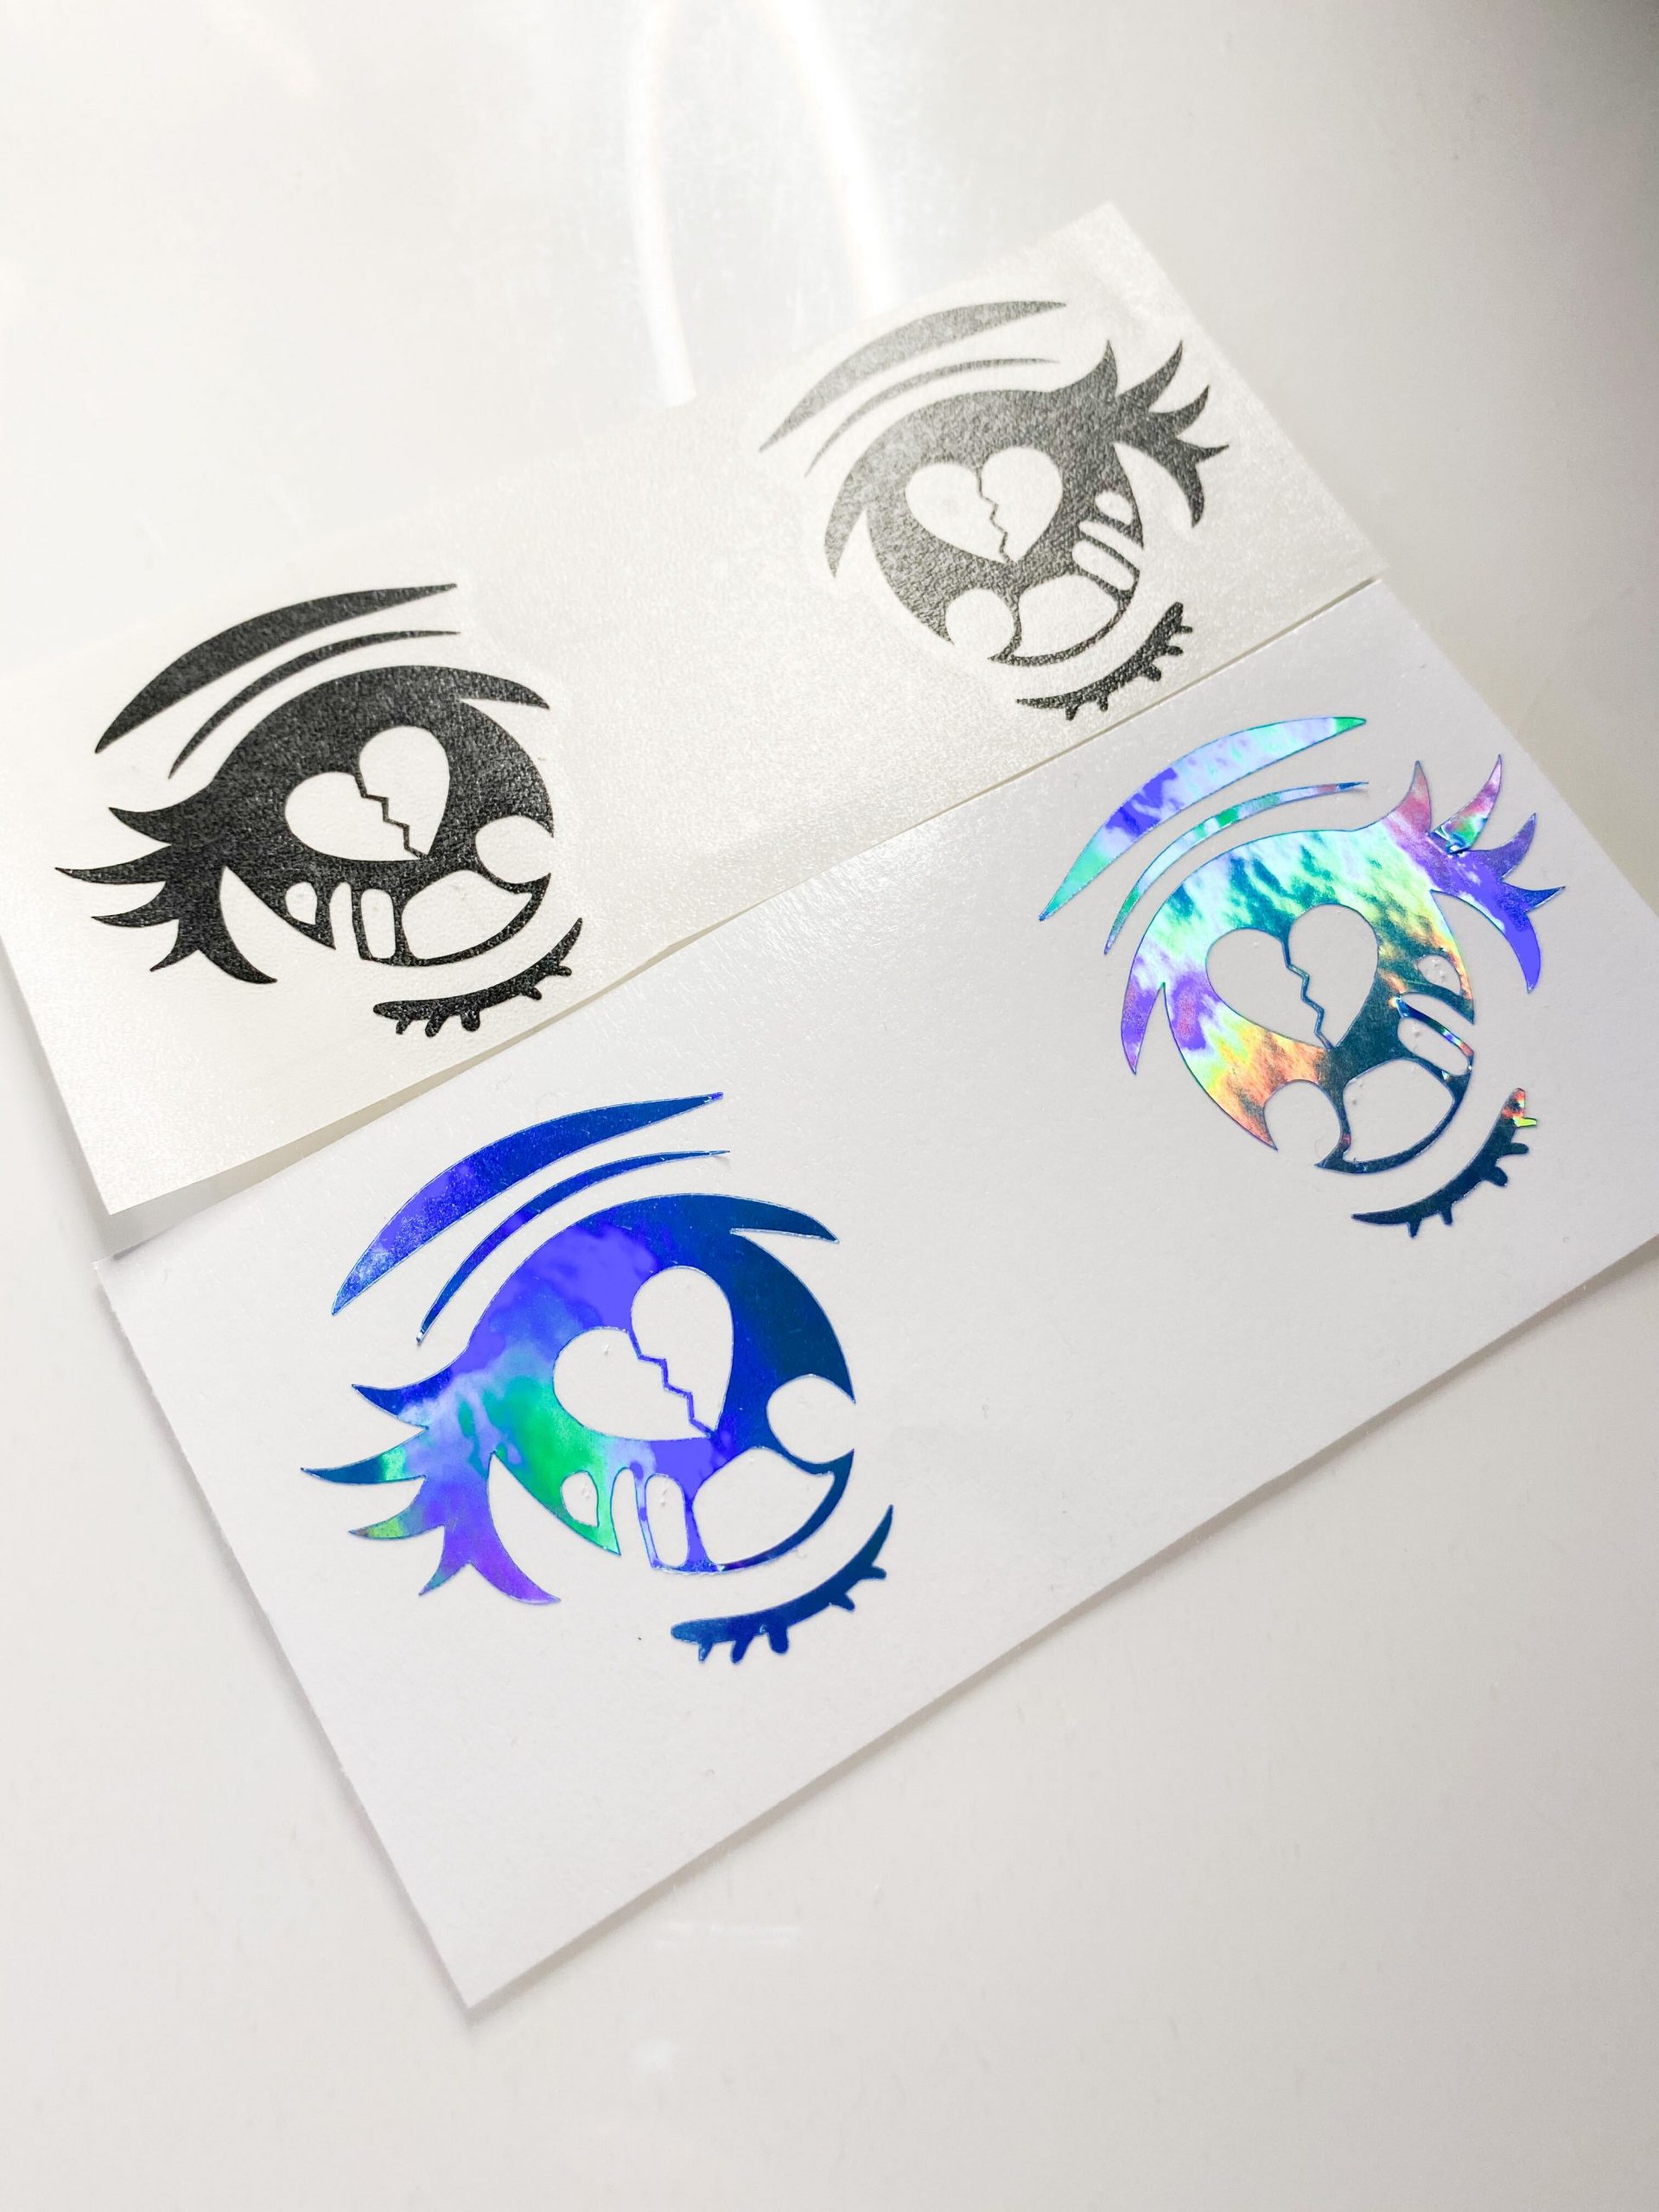 How to Make Holographic Anime Stickers  Sticker it